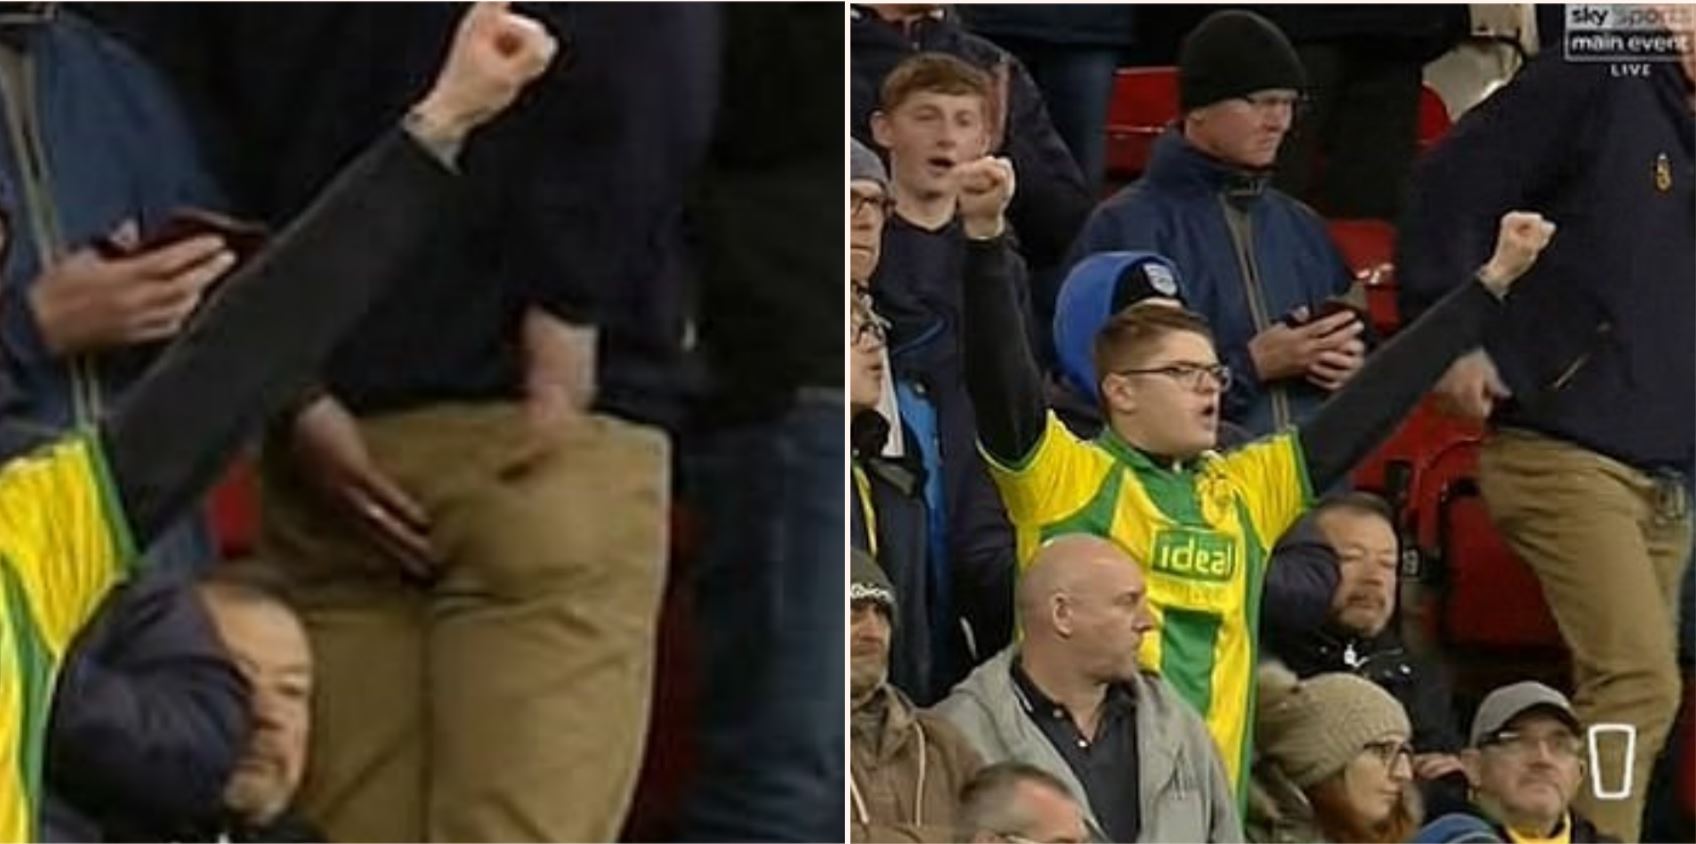 West Brom football fan appears to have had an unfortunate accident that aired on live TV